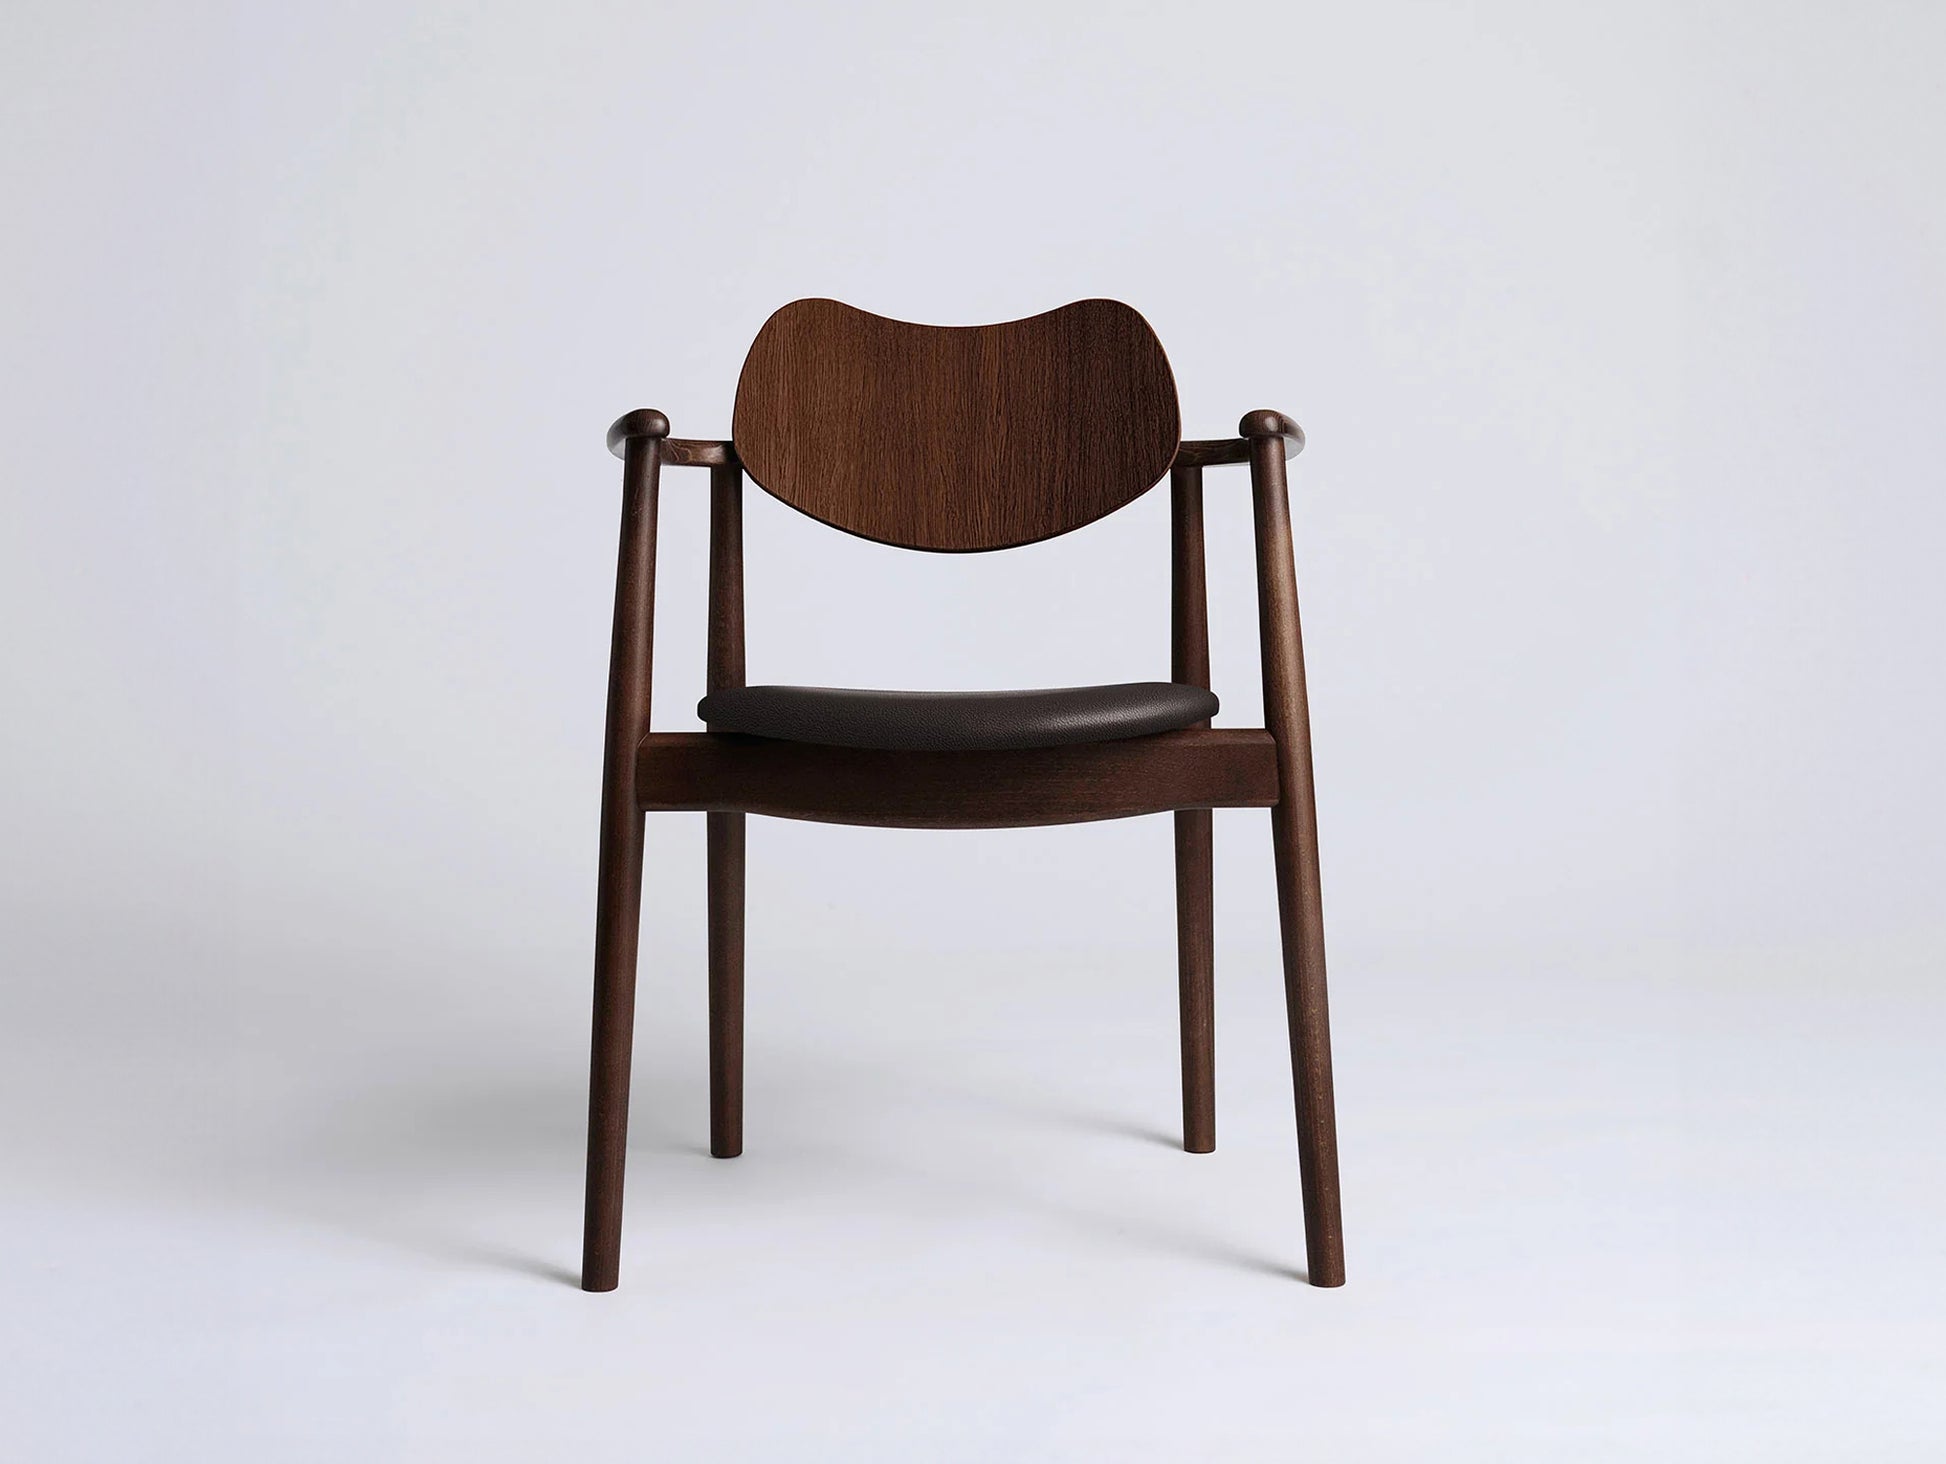 Regatta Chair Seat Upholstered by Ro Collection - Walnut Stained Beech / Standard Dark Brown Leather